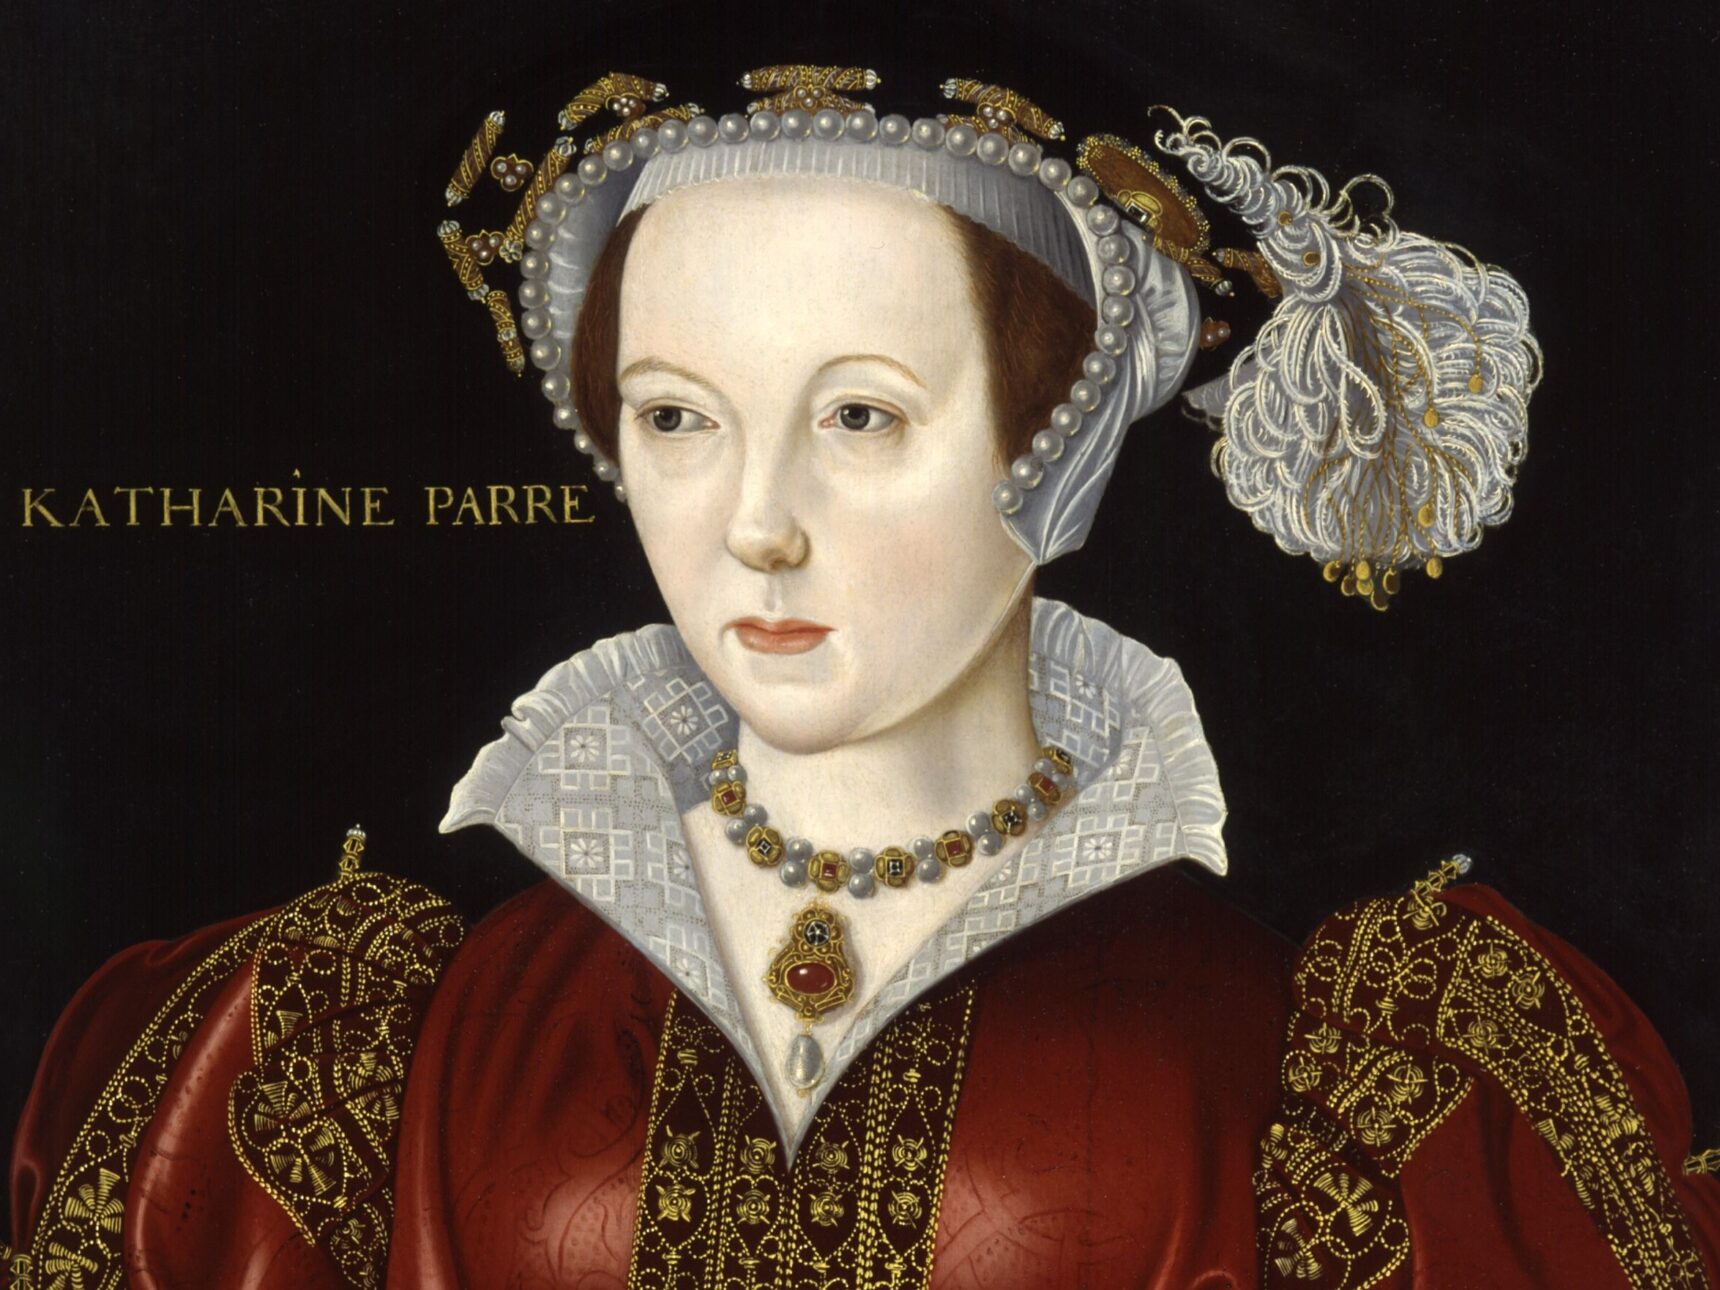 The last of Henry VIII's six wives, Katherine Parr, lived and died at Sudeley, where she still remains today entombed in the beautiful 15th century church within the castle grounds